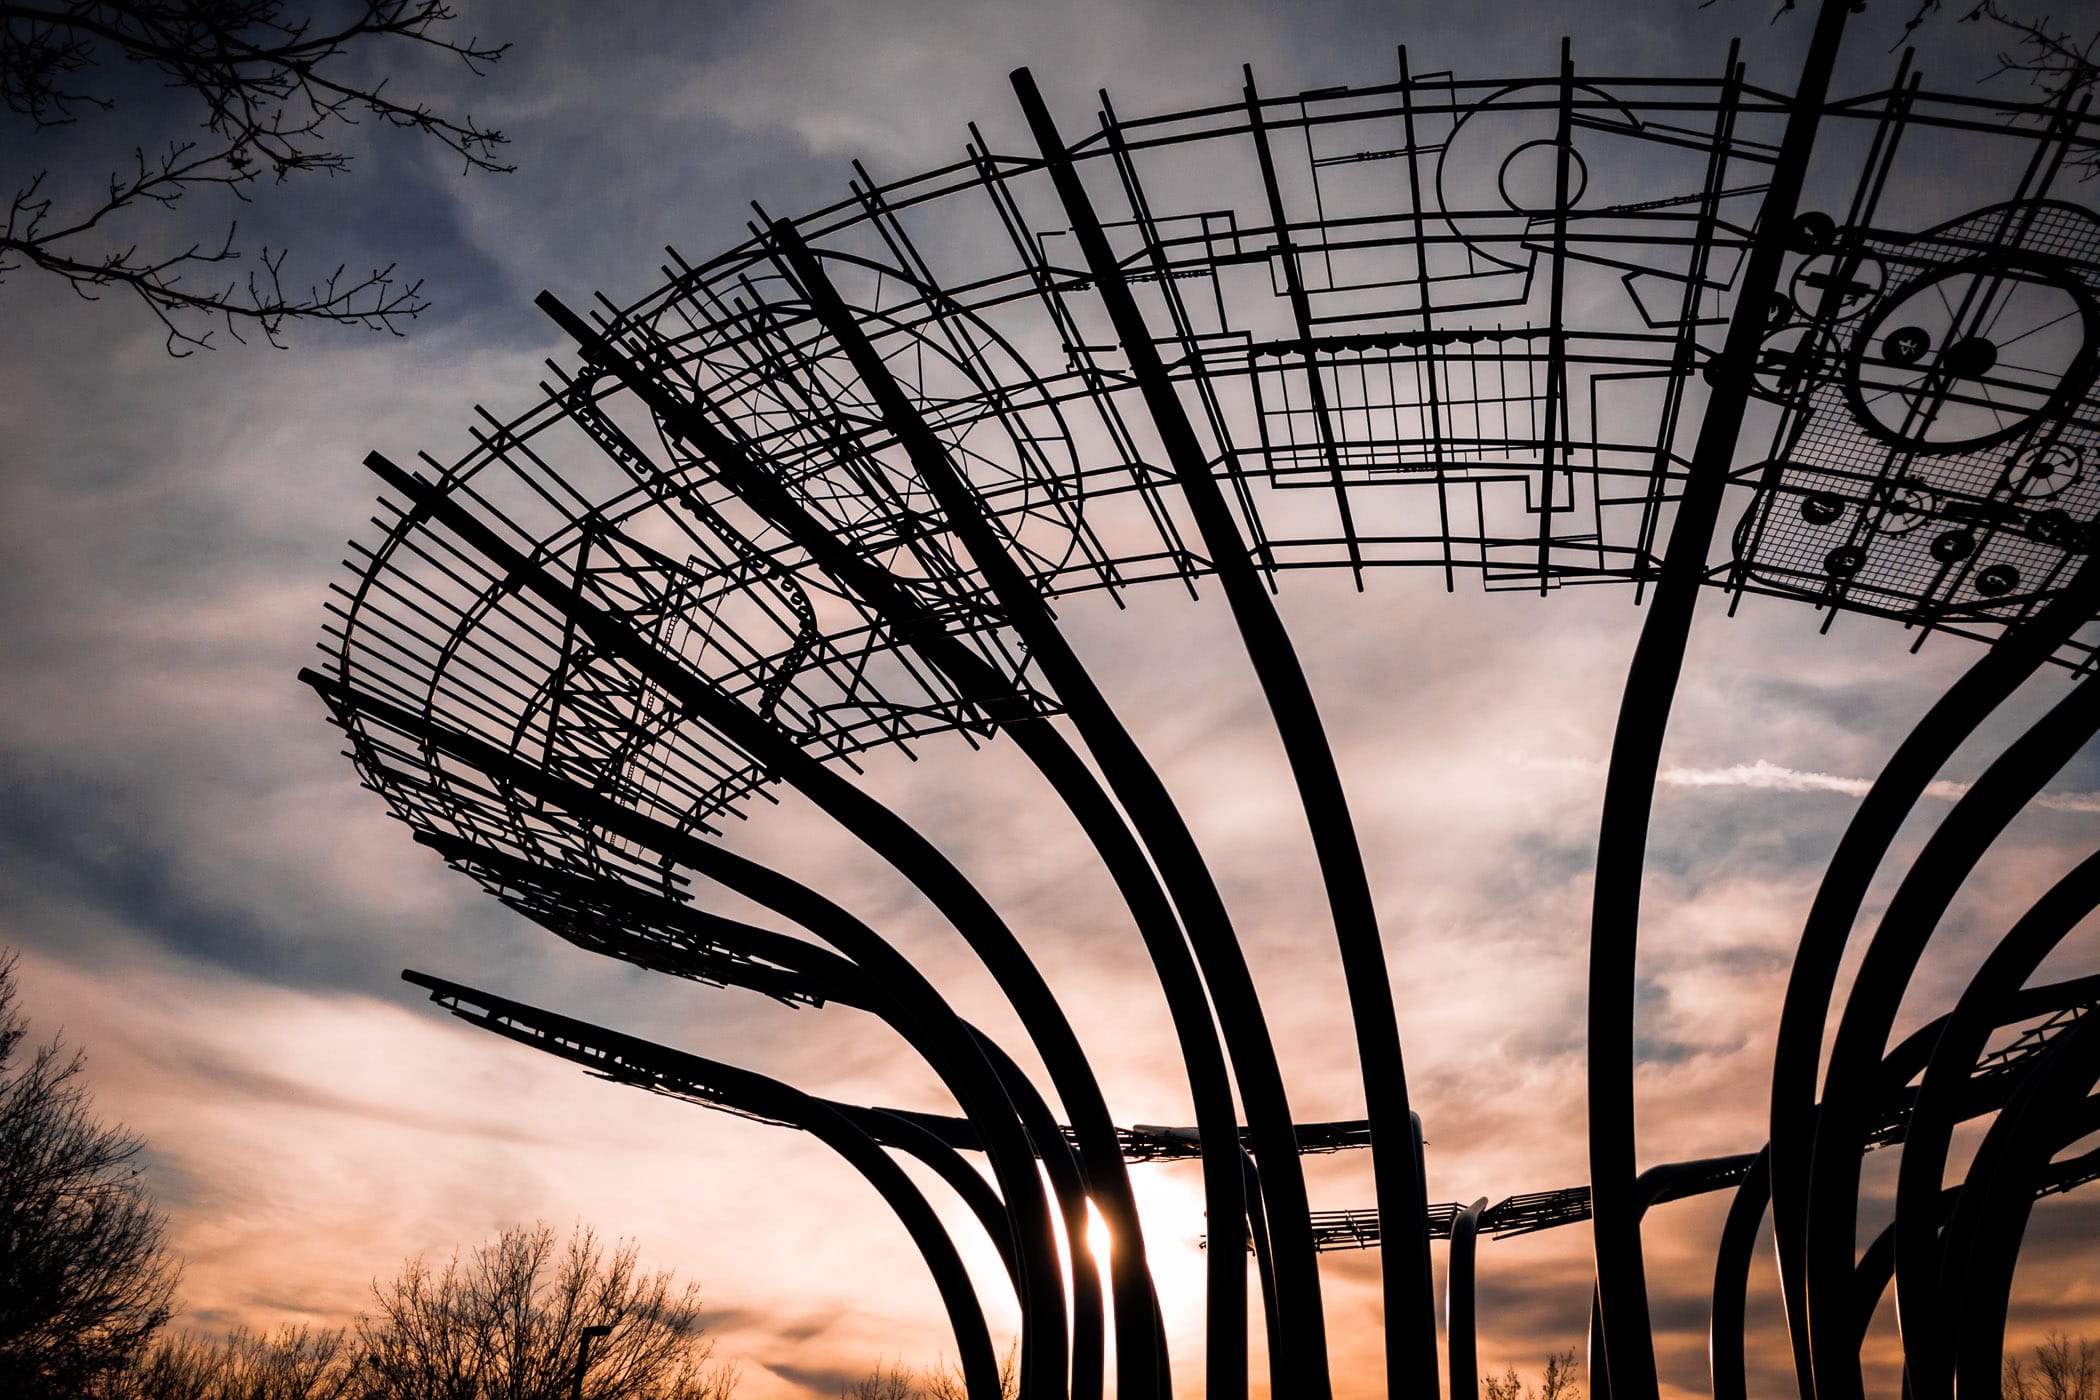 The sun sets on the 45-foot-tall, 140-foot-wide Blueprints sculpture at Addison Circle in Addison, Texas.